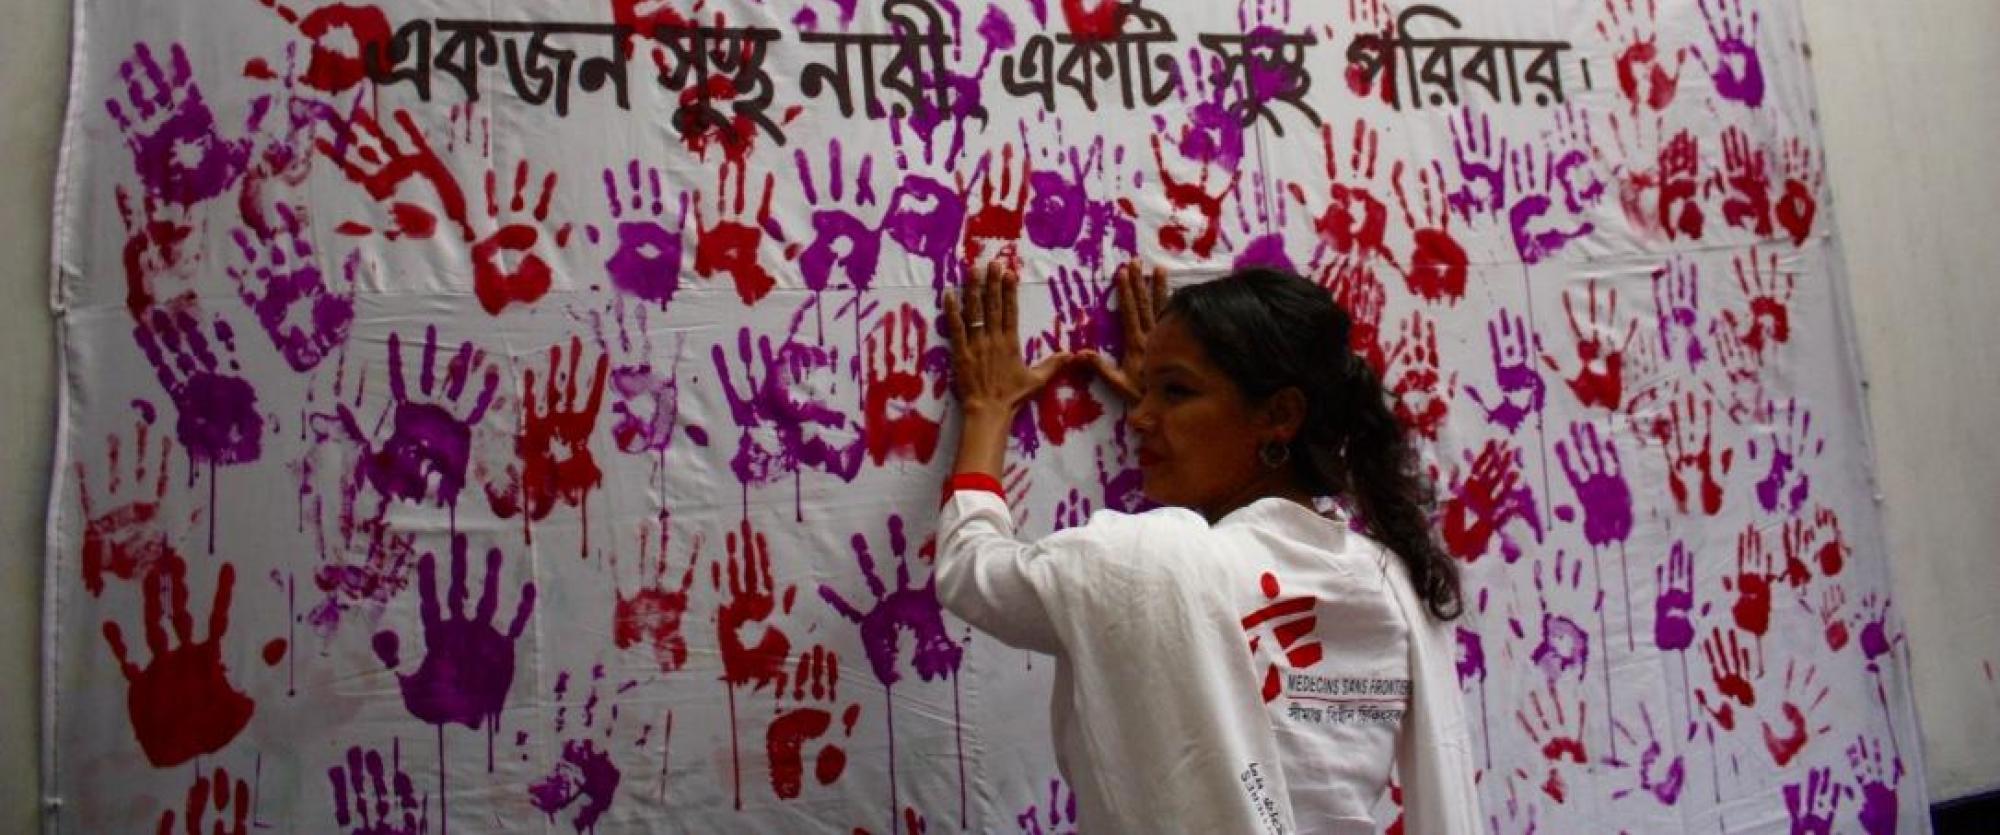 Aiding Survivors of Sexual and Gender-Based Violence in Dhaka, Bangladesh